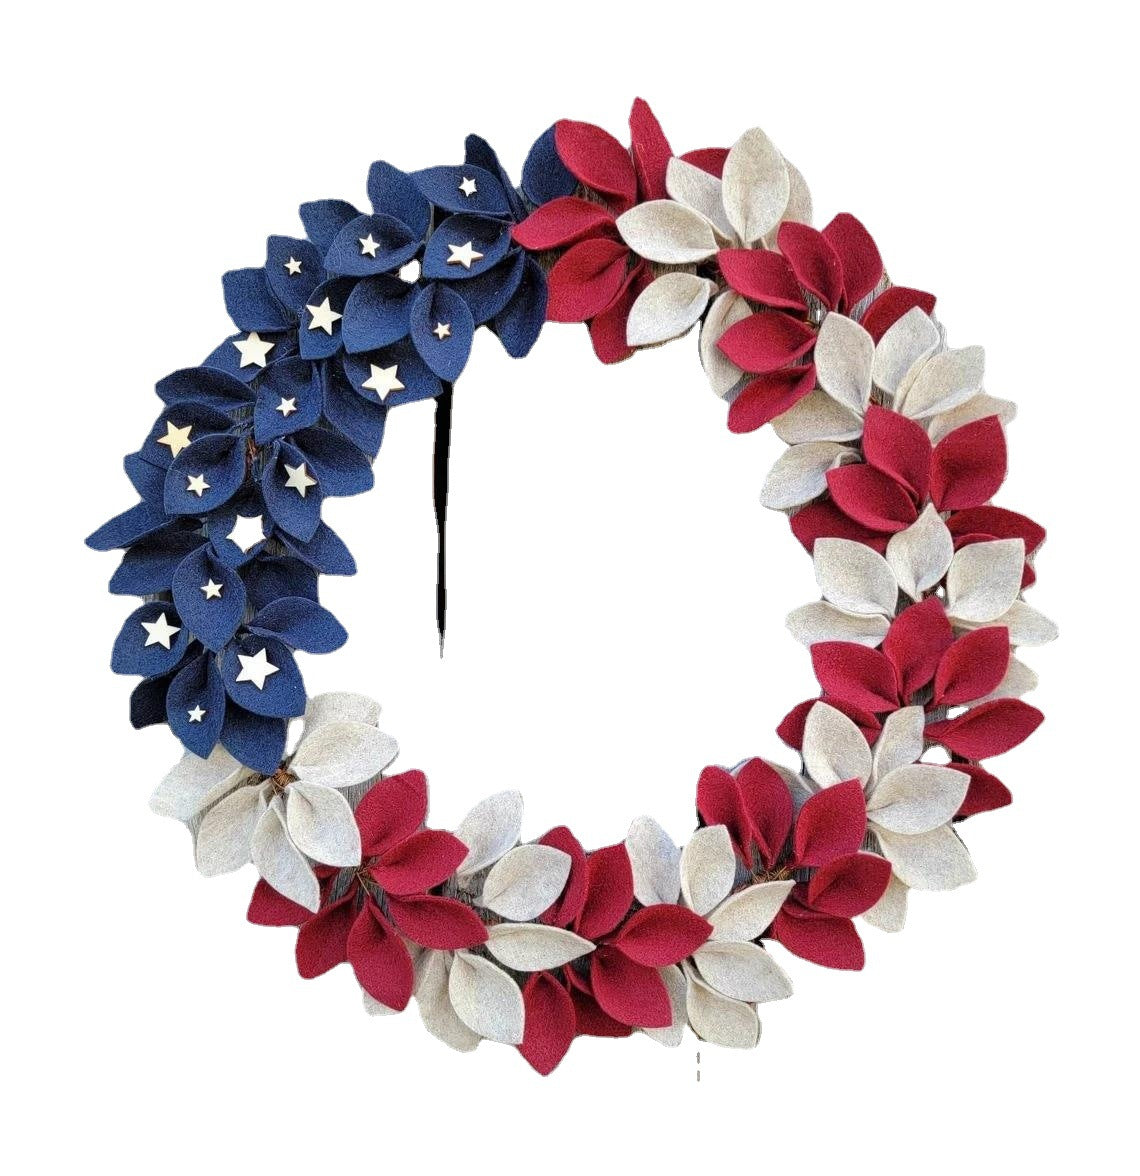 4th of July decorations, American flag decorations, Patriotic decorations, Red, white and blue decorations, July 4th wreaths, July 4th garlands, July 4th centerpieces, Holiday Showcase Tool Independence Day Garland